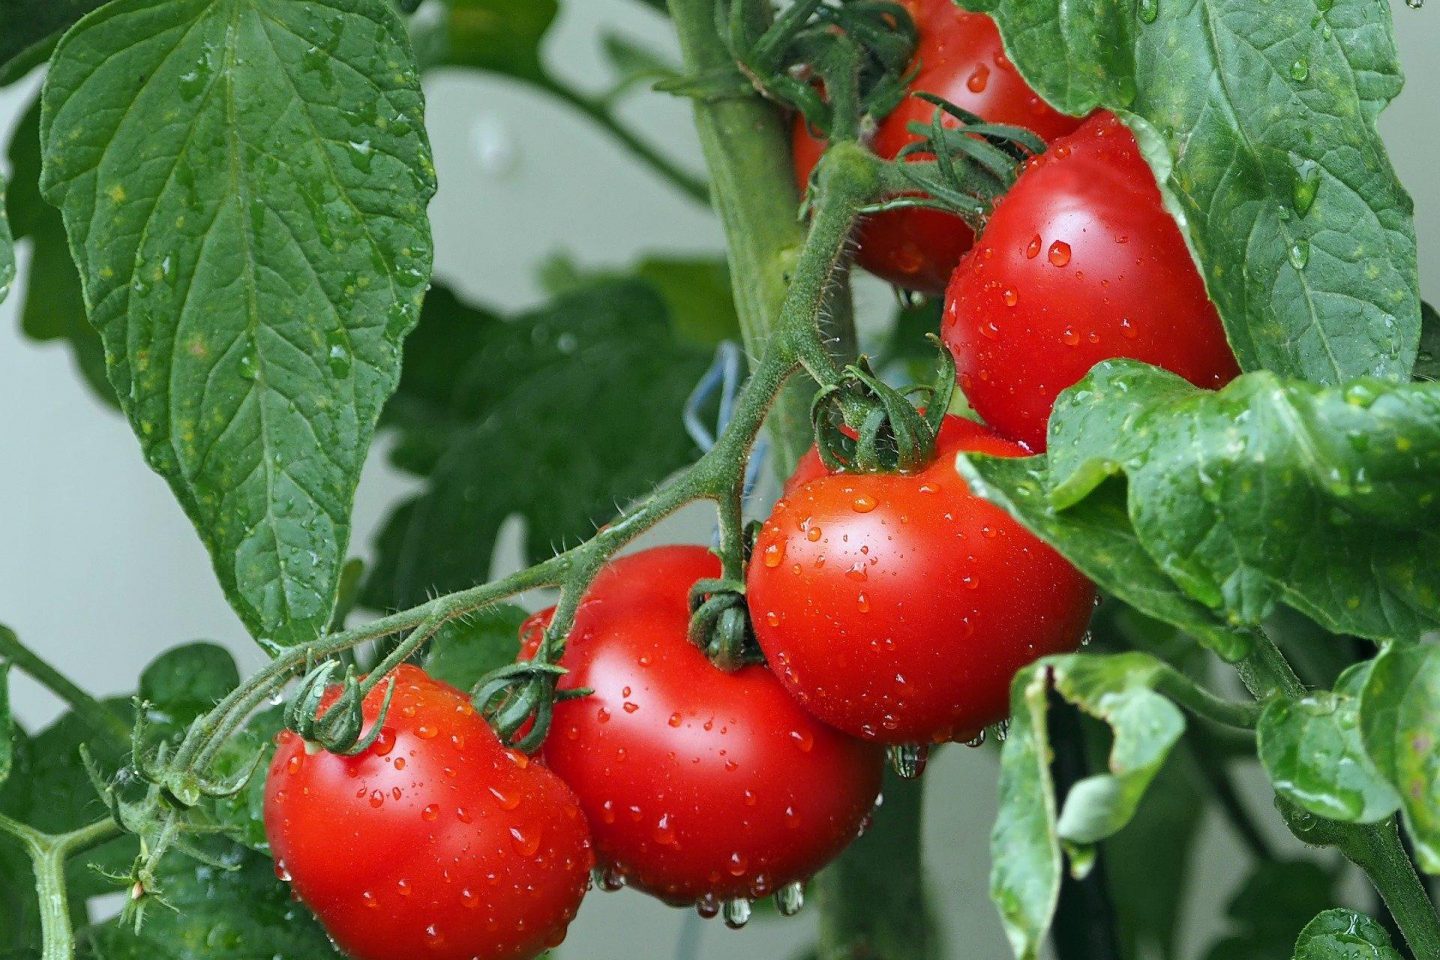 Ripe red tomatoes on the vine